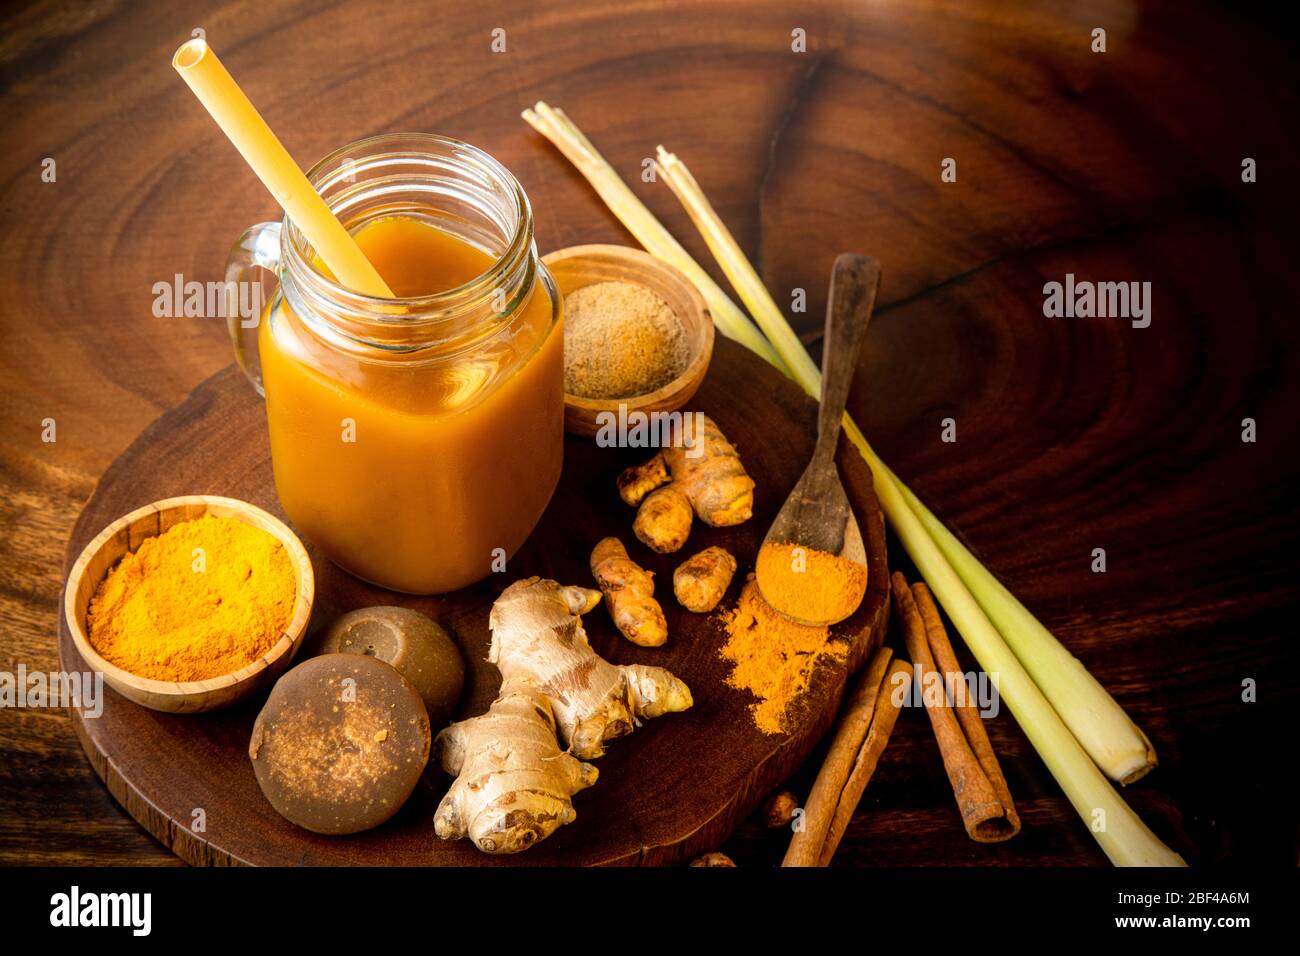 Jamu, a herbal traditional elixir medicine from Indonesia and Malaysia. Made from natural materials from ancient Javanese culture Stock Photo